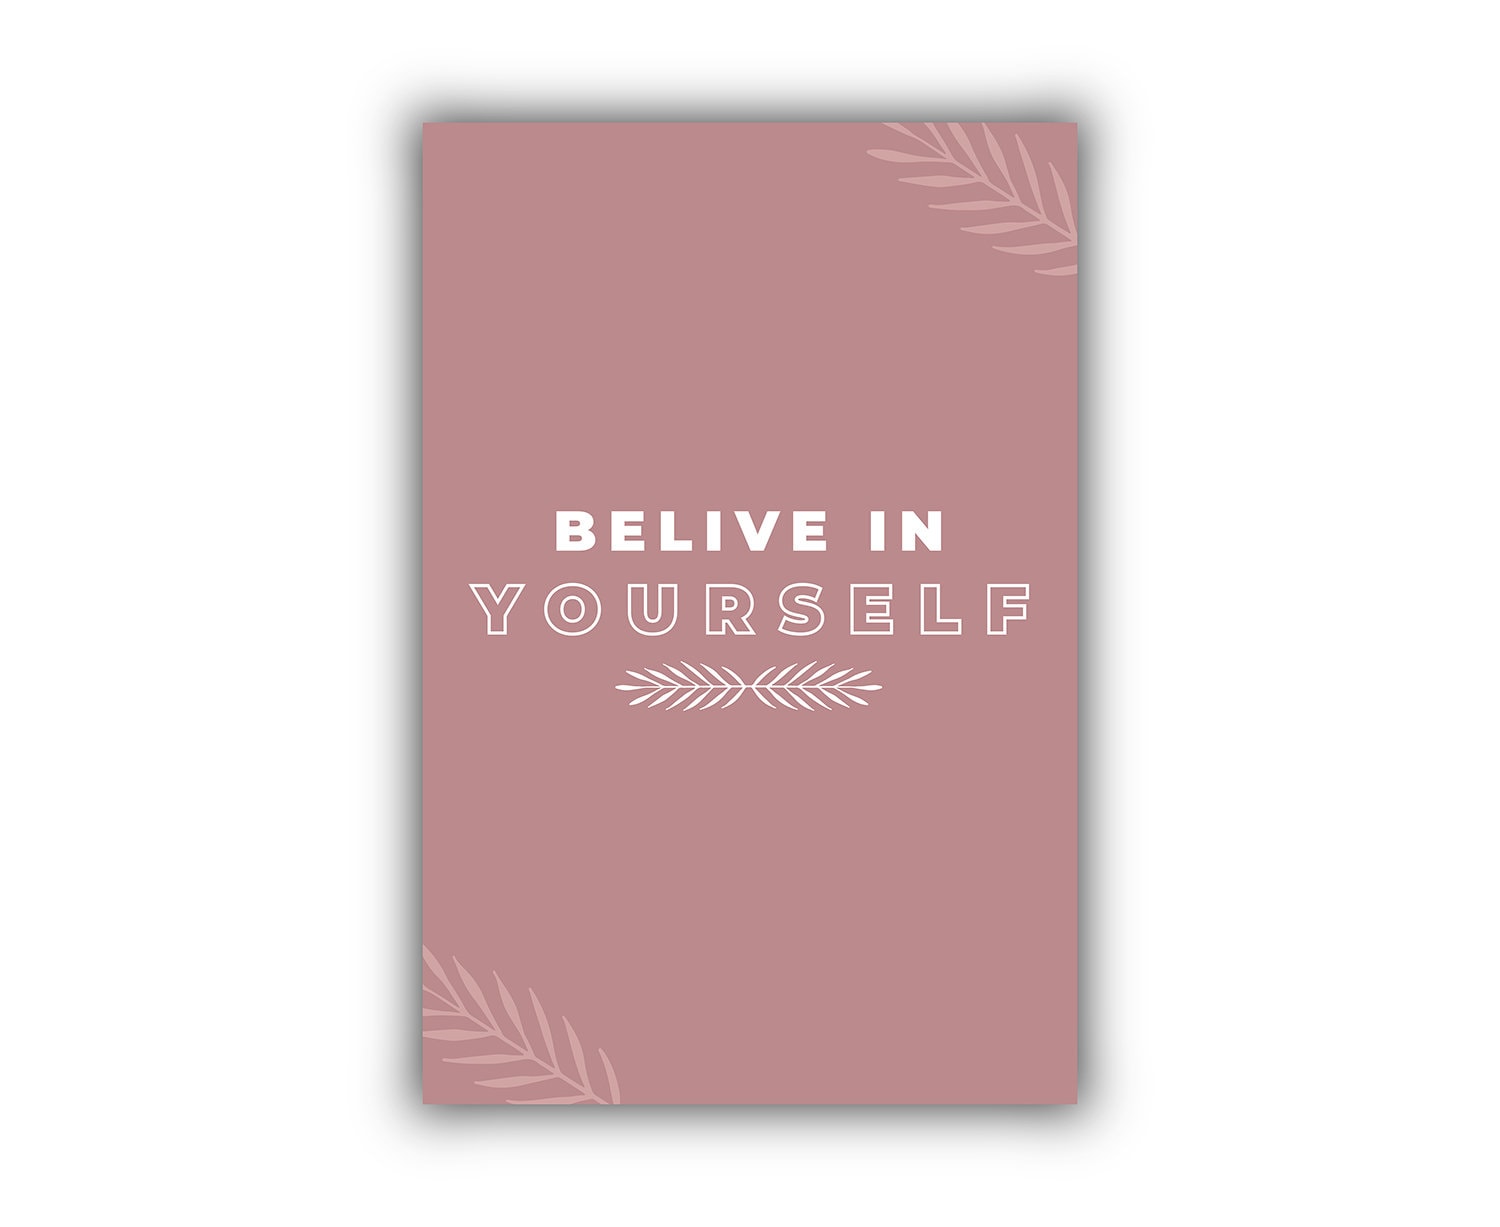 Believe in Yourself, Poster Print, Modern Poster prints, Art Prints for Homes, Dorm Rooms wall art, Office room wall art, Quote poster print